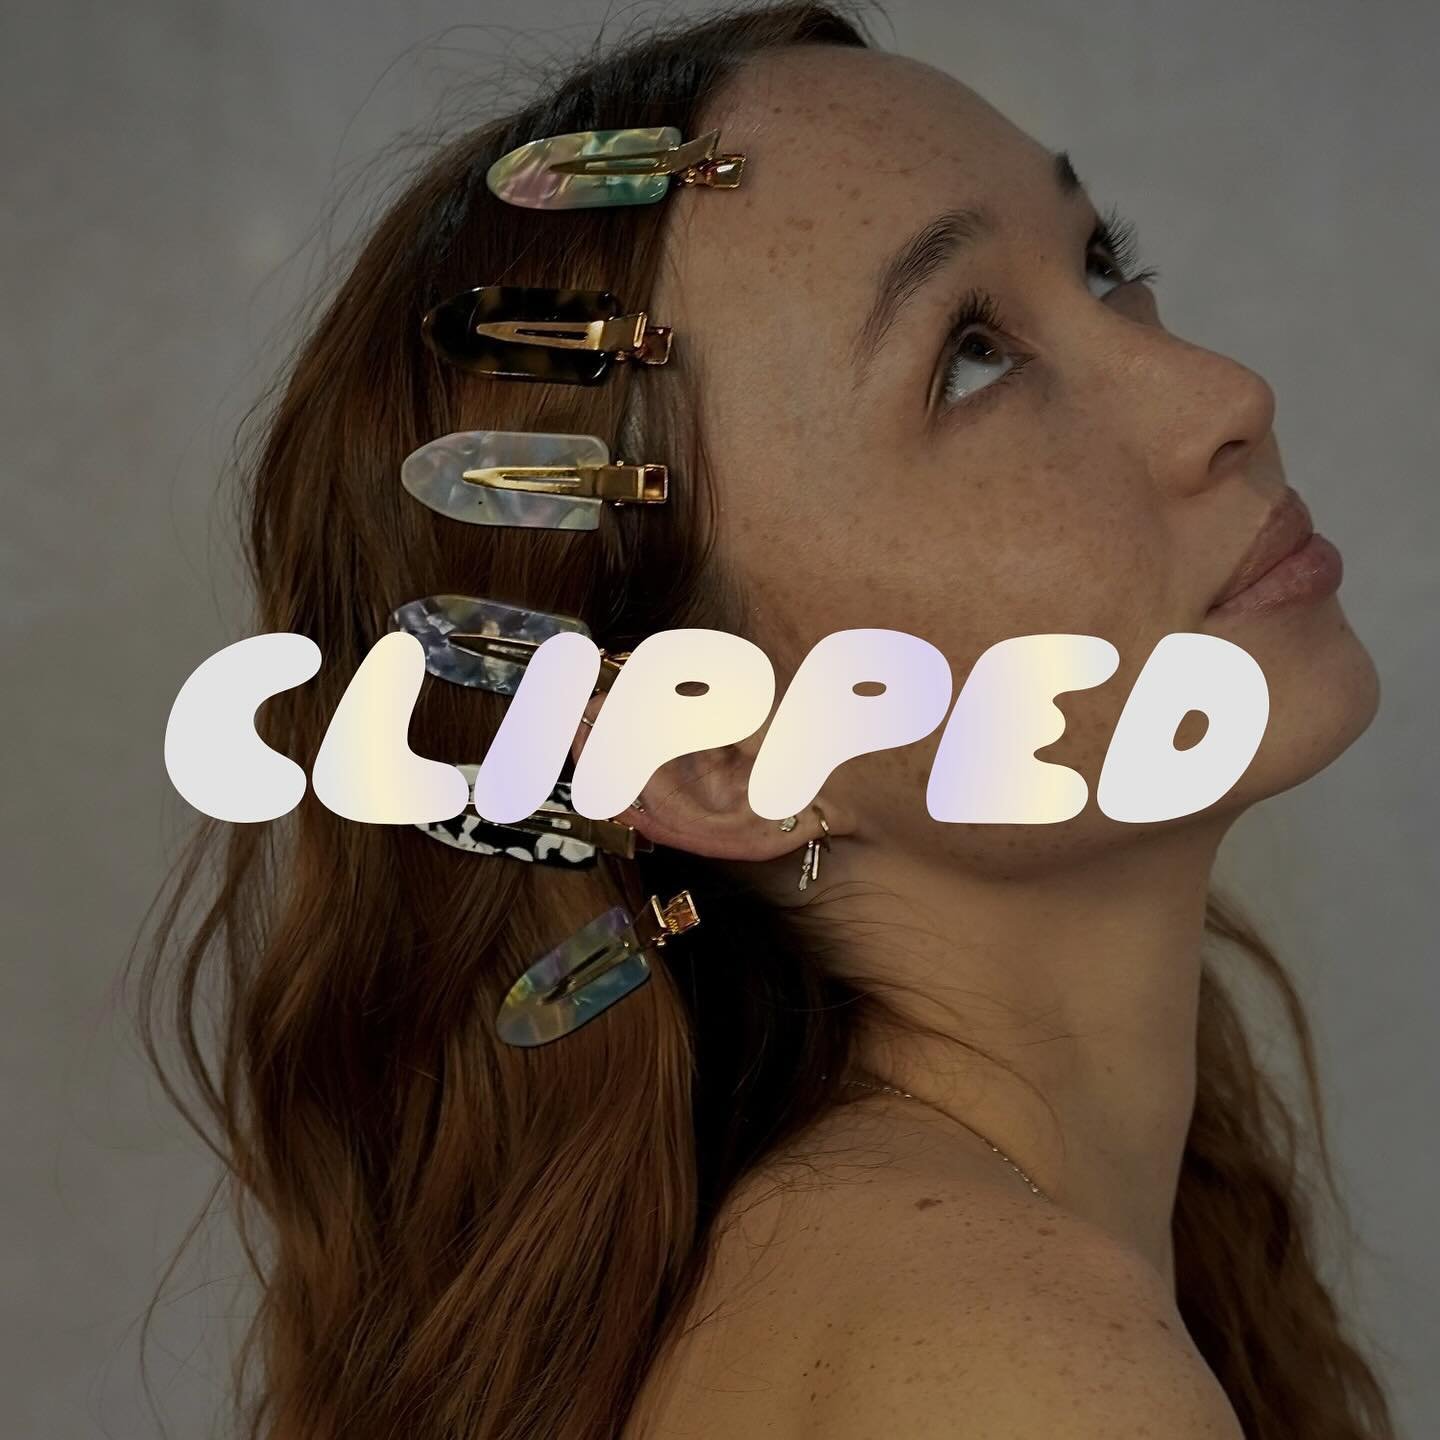 Let me tell you why I&rsquo;ve been obssessed with CLIPPED by Oasis 🦋 &amp; why I think it will be the next &ldquo;it&rdquo; girl brand! 

Within the short time that @clippedbyoasis has launched, this hair clip brand has created personal and invitin